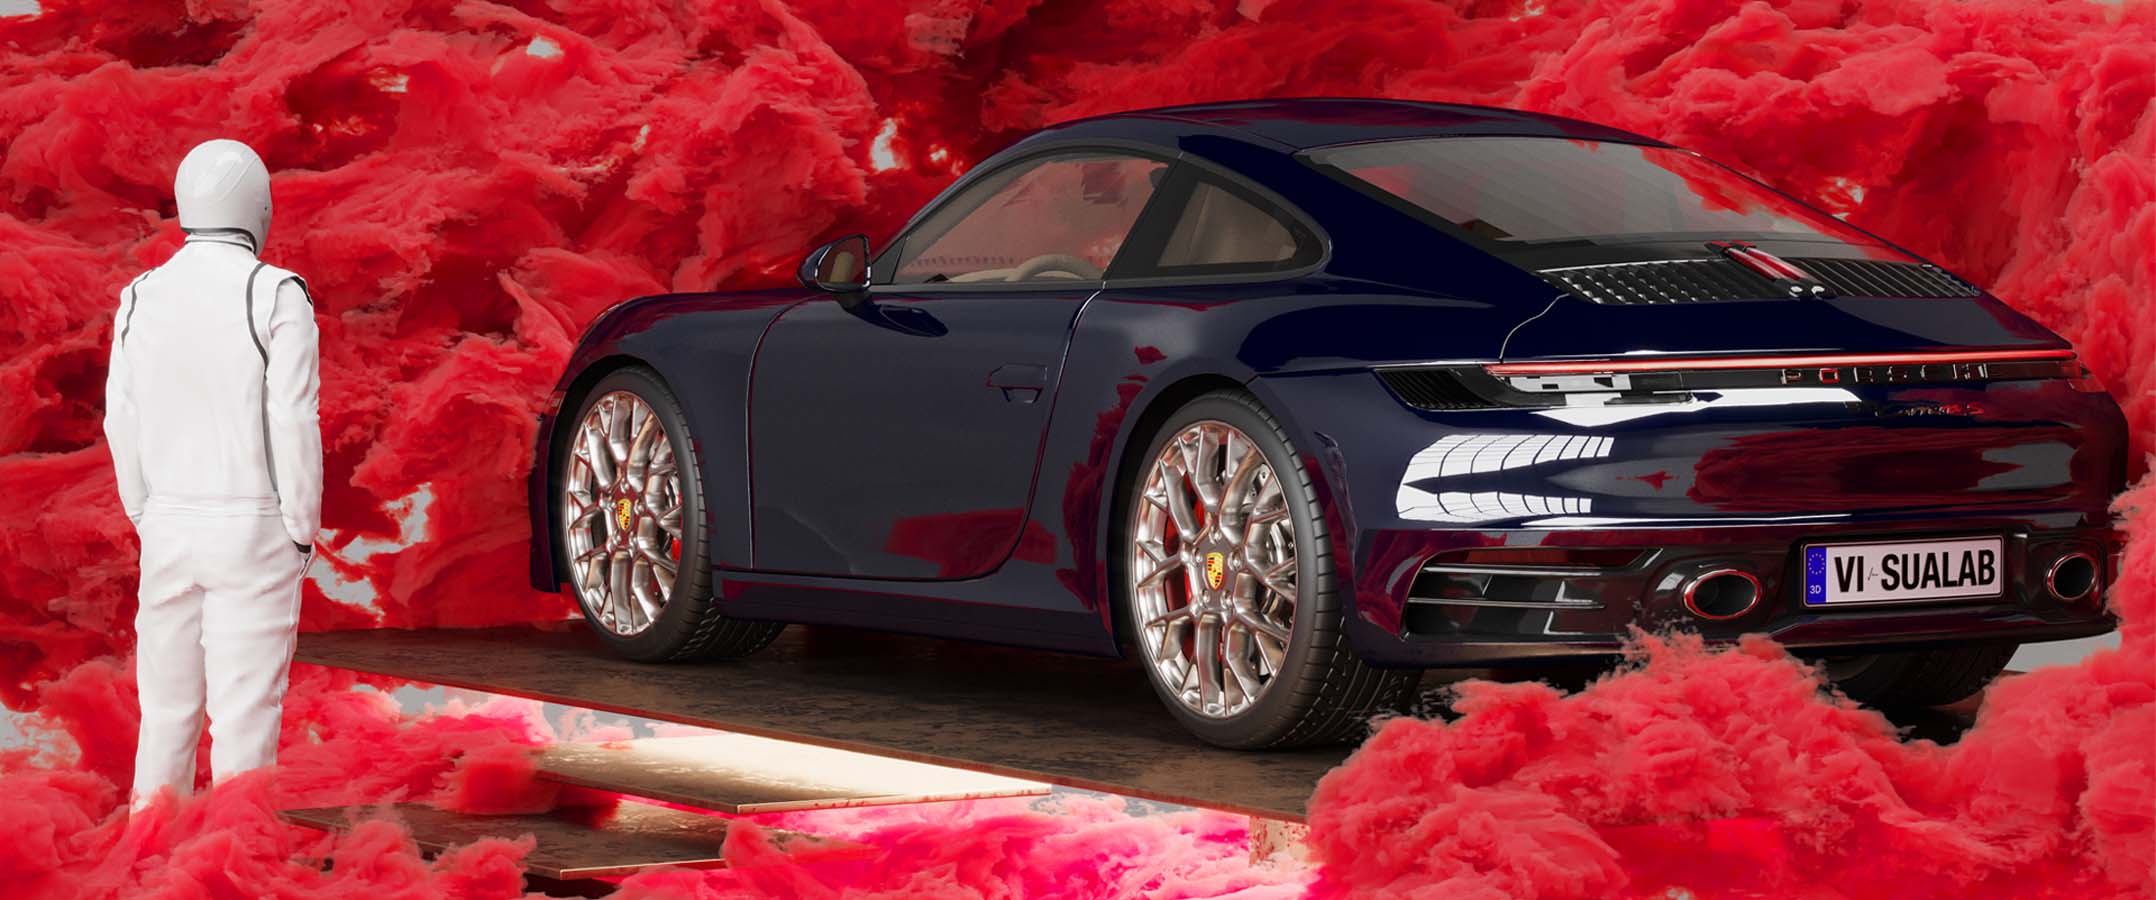 The porsche 911 4S in the abstract virtual space